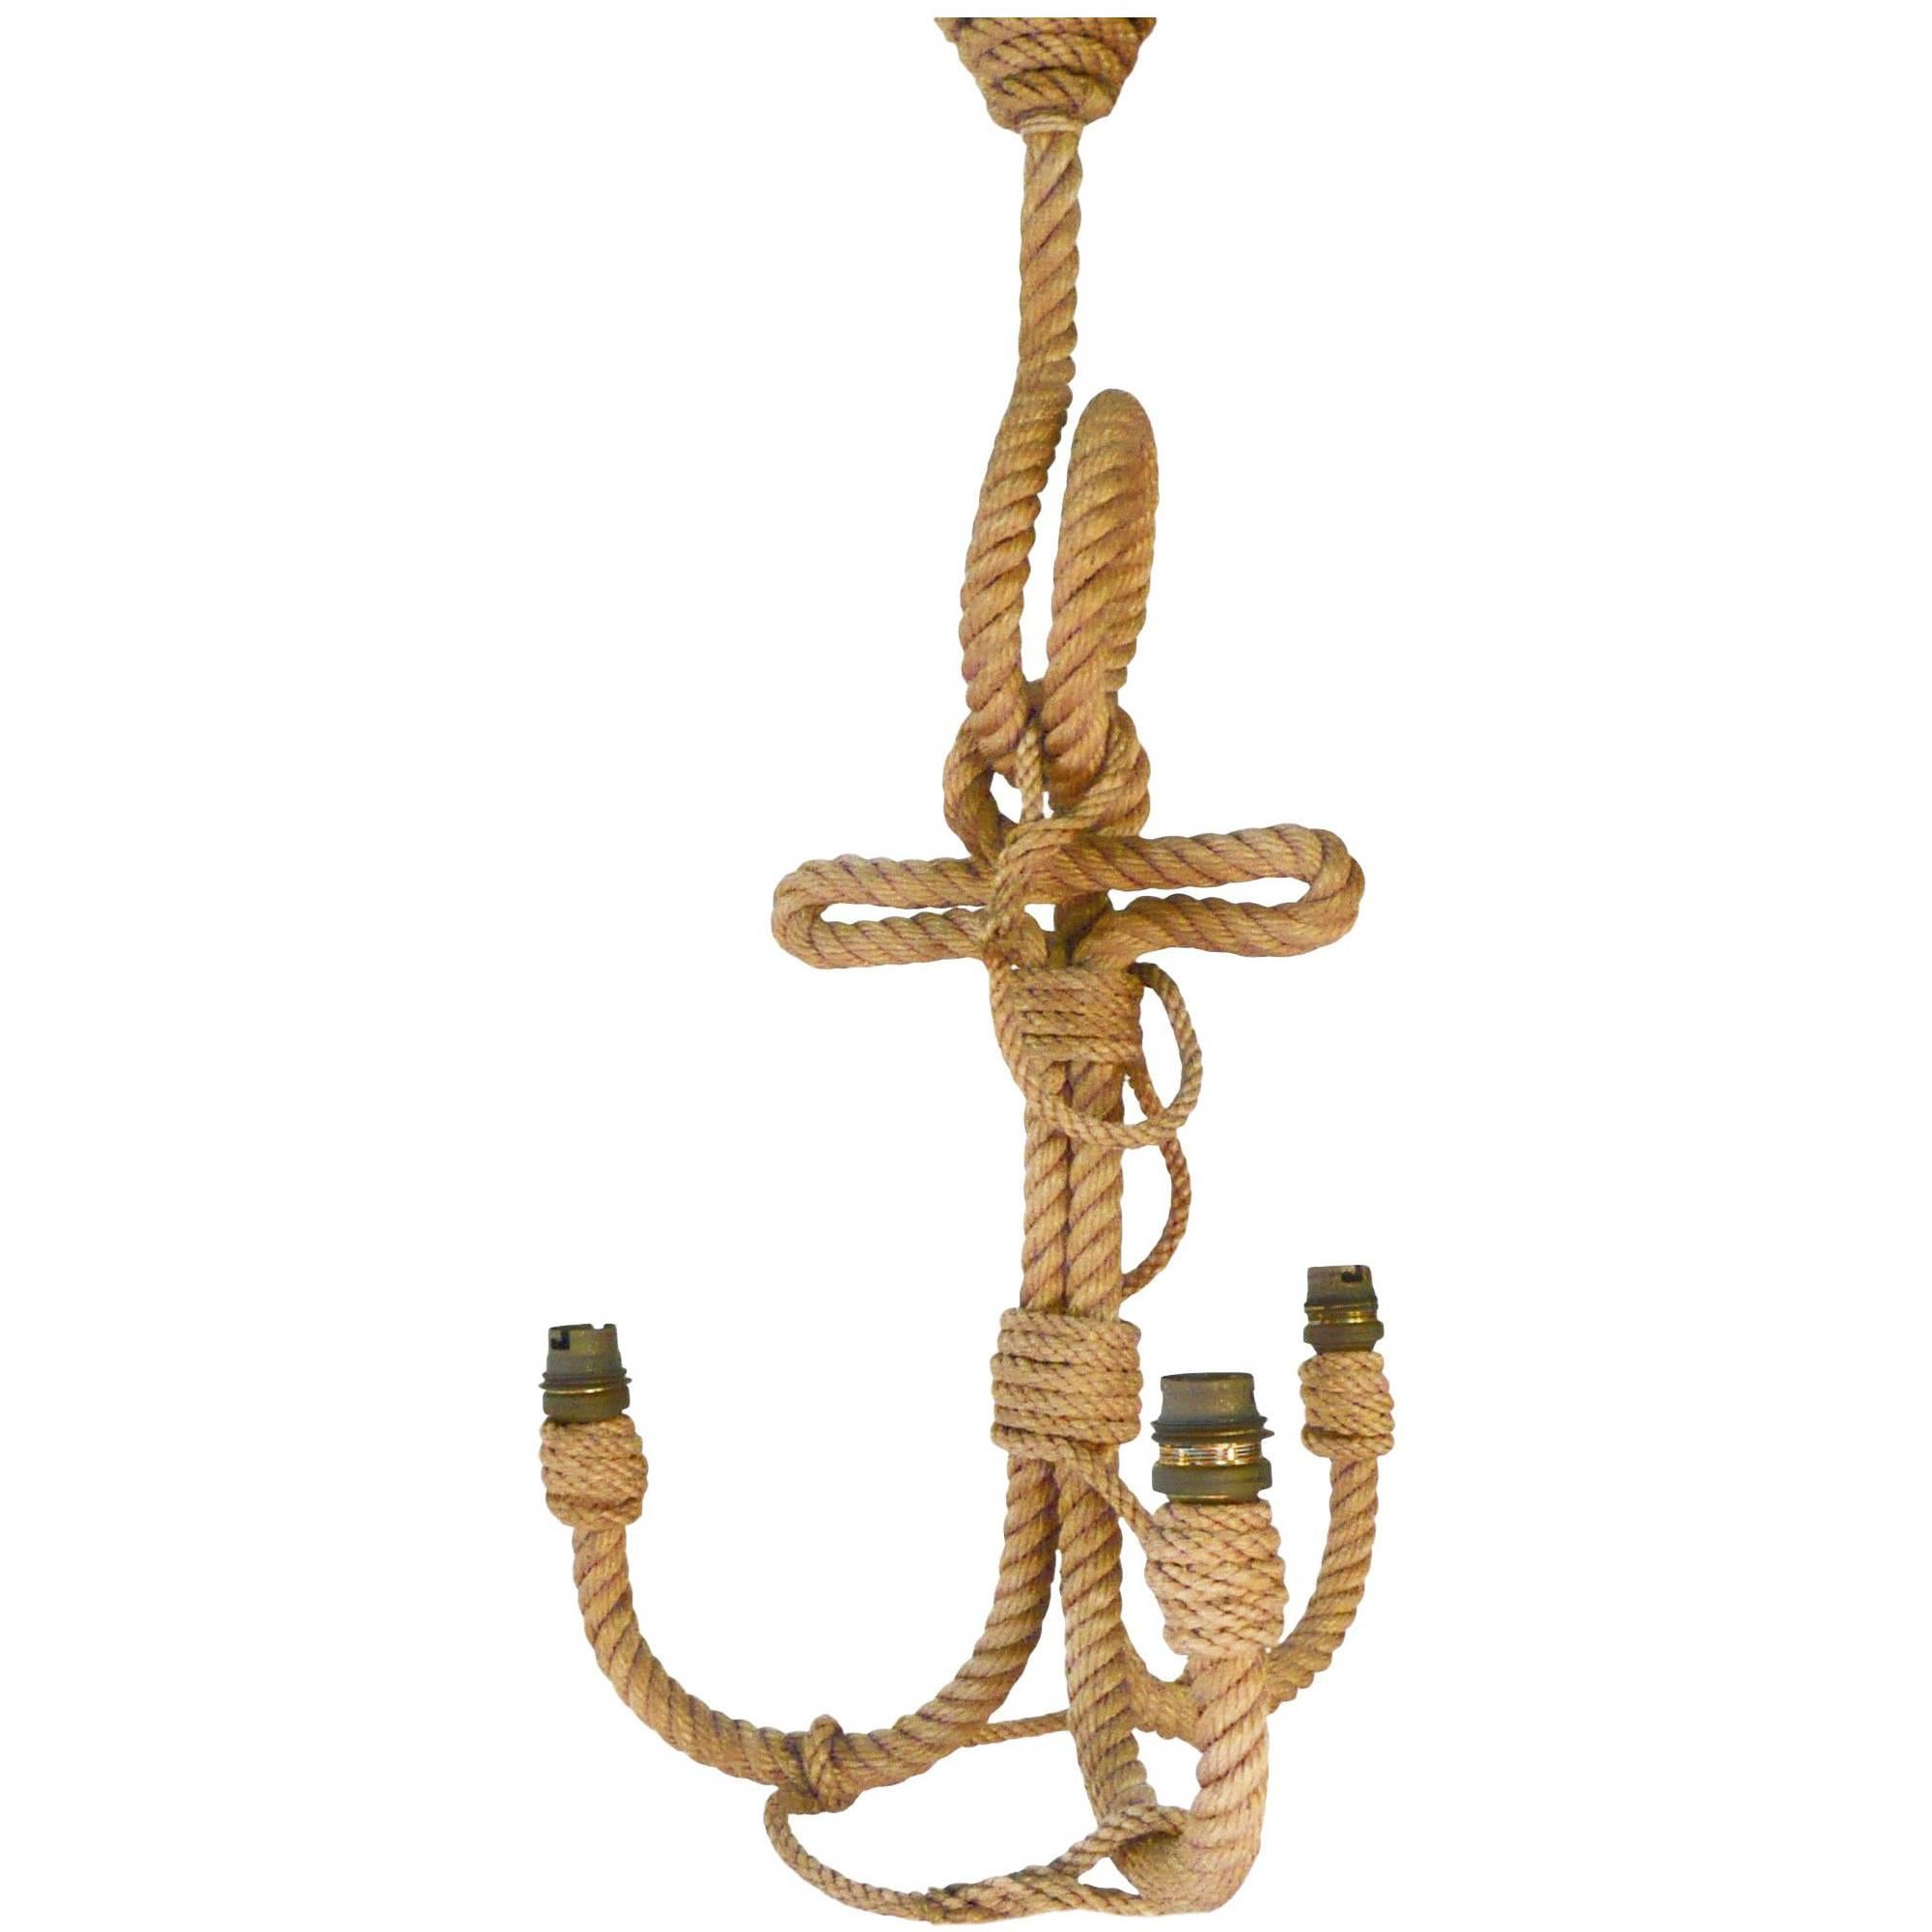 Petite Marine Theme Anchor Shaped Chandelier by Audoux Minet, France, 1960s For Sale